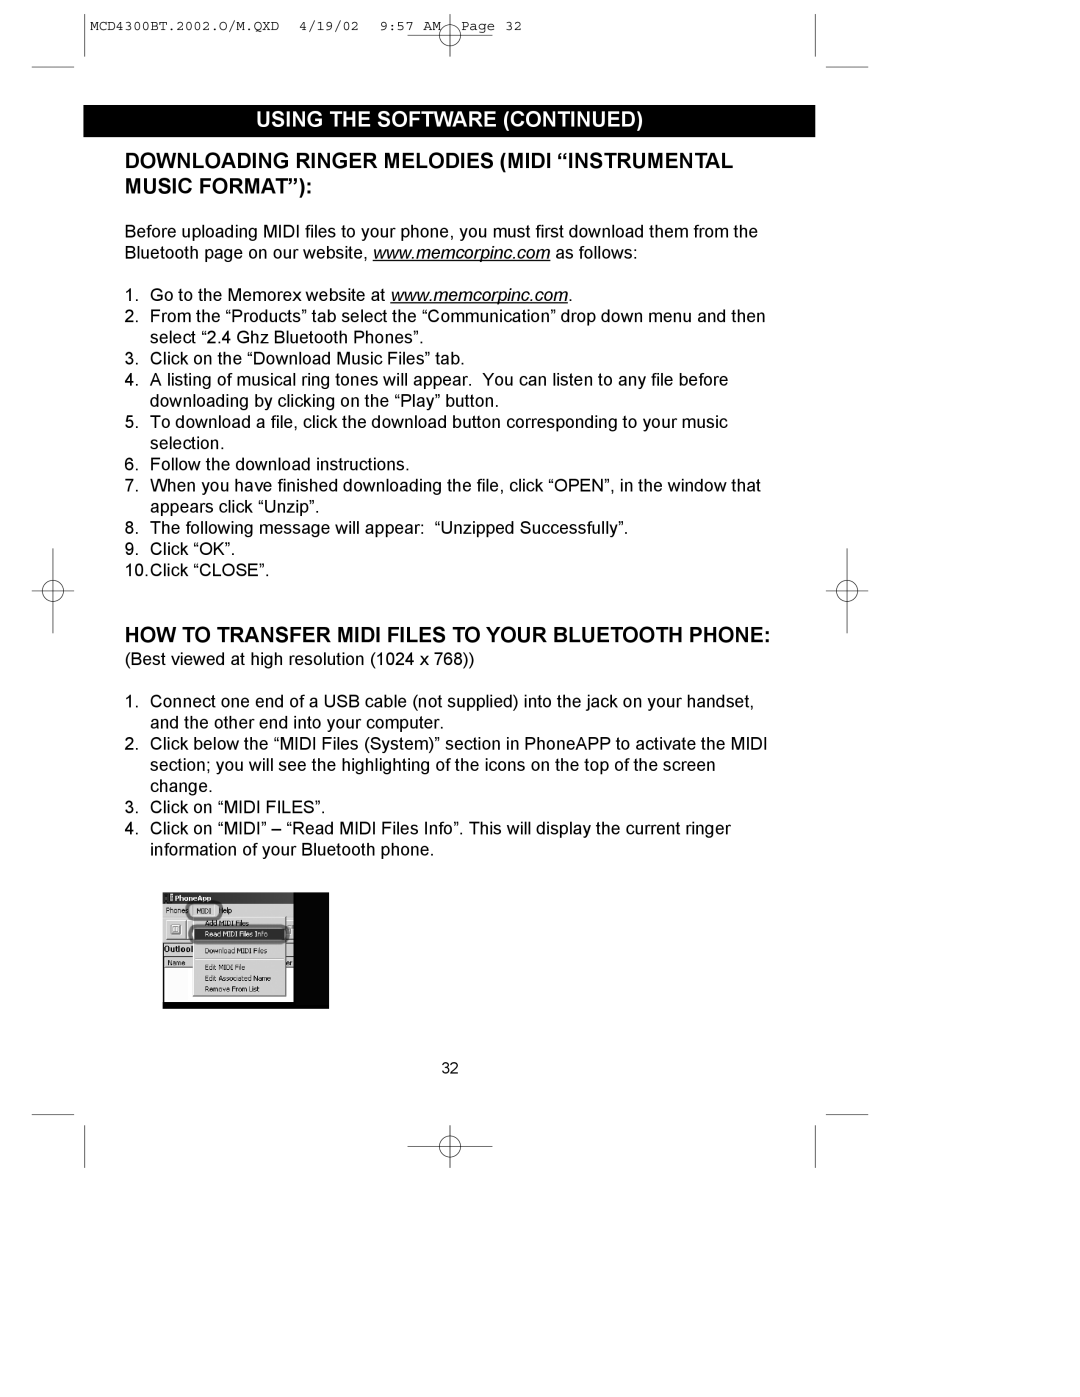 Memorex MCD4300BT operating instructions Using The Software Continued 